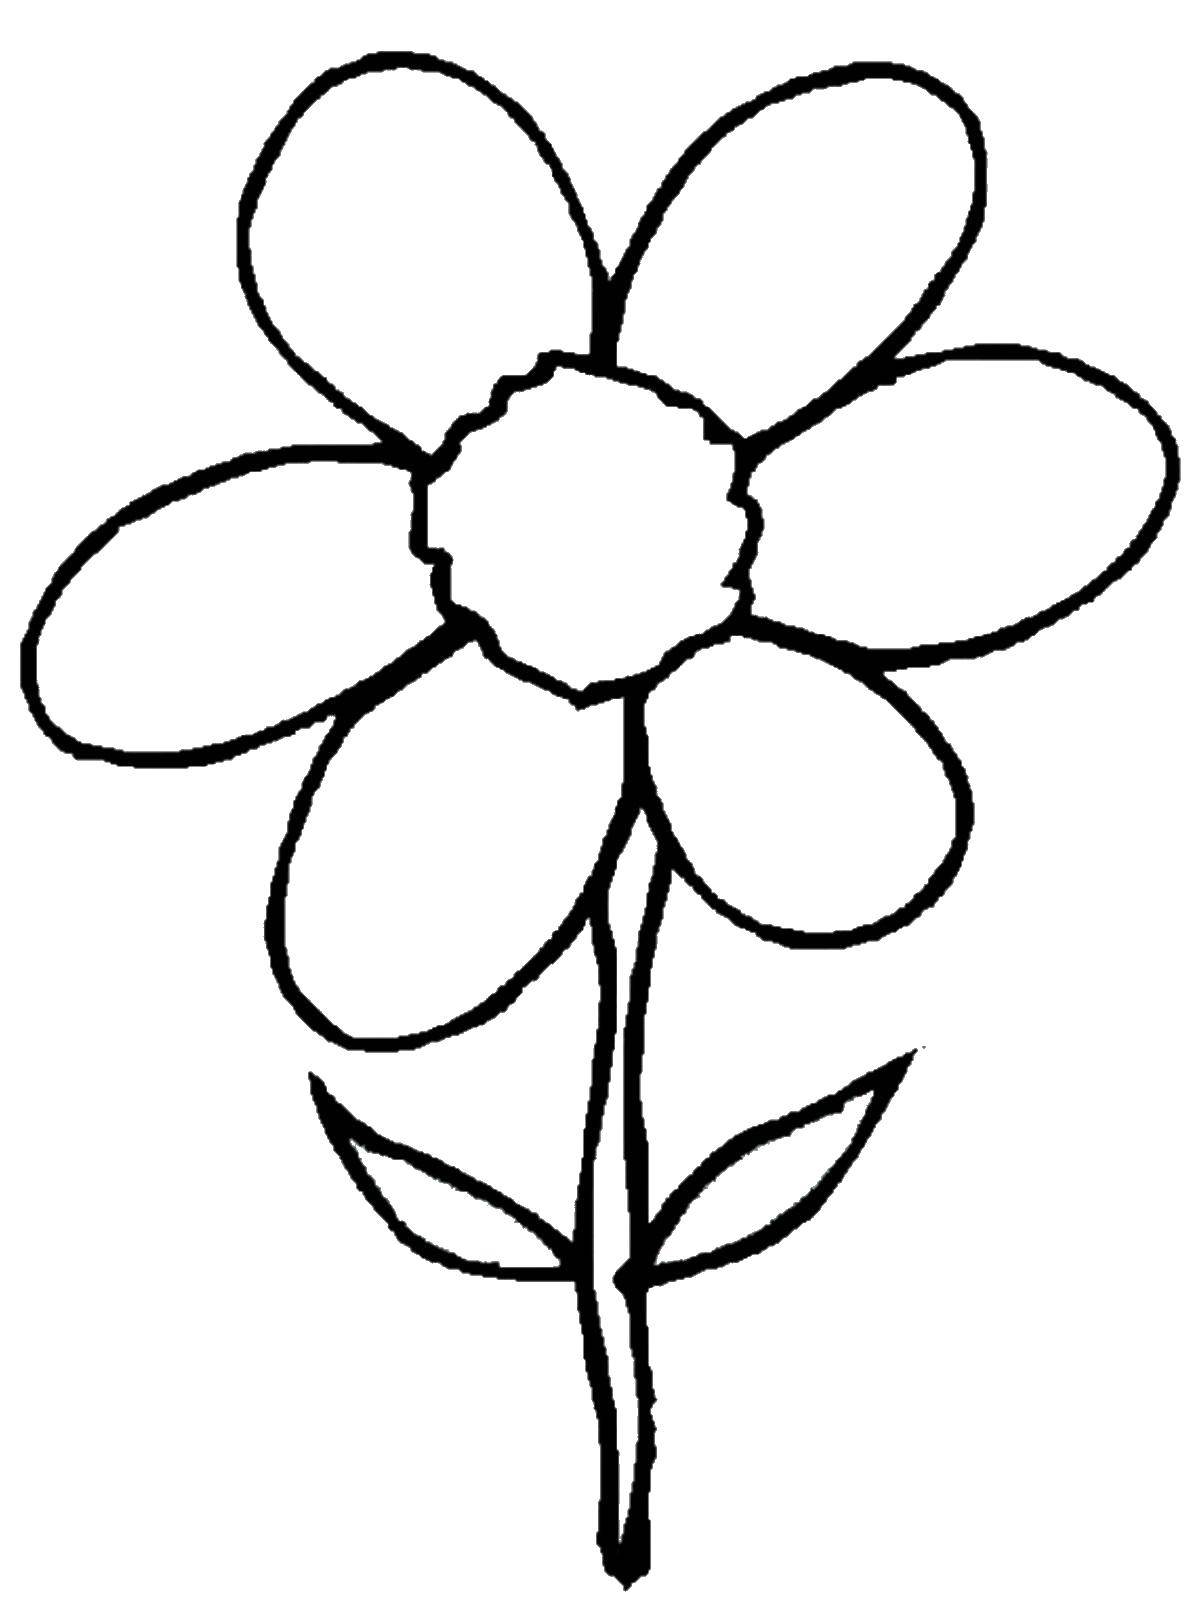 Coloring Daisy. Category flowers. Tags:  flowers.